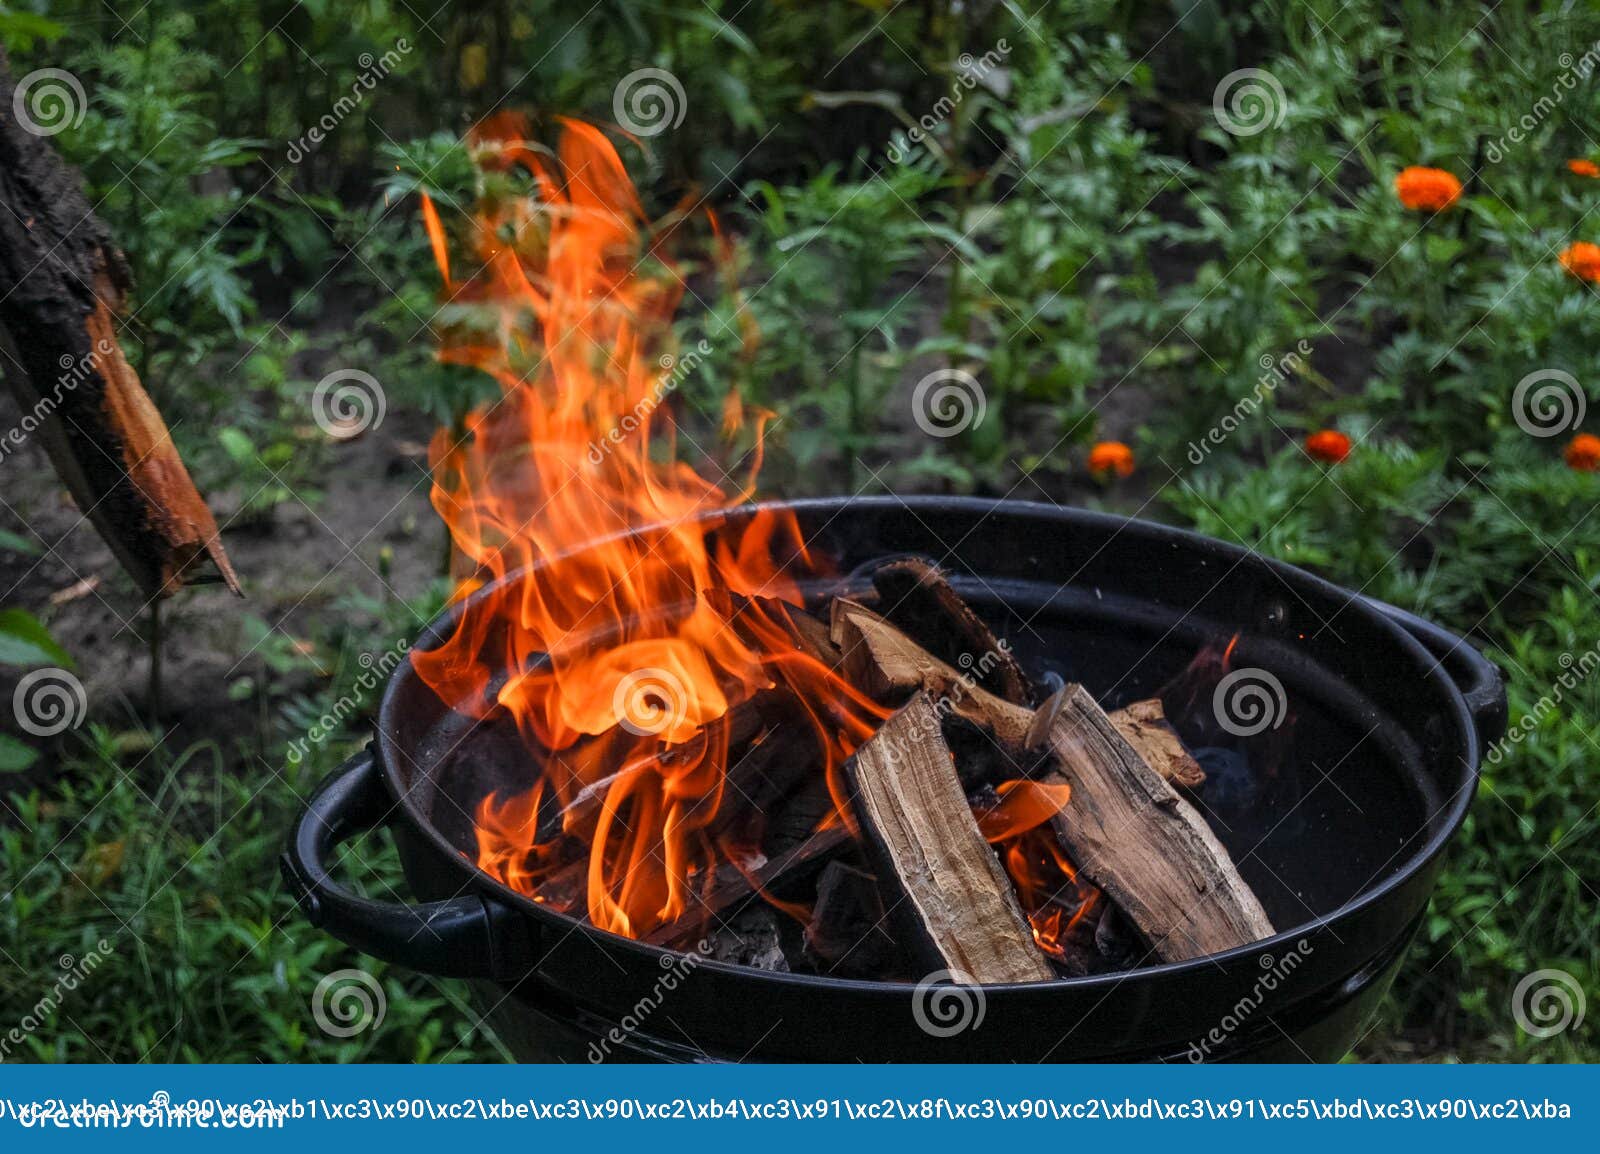 Actual Campfire at the Open Air Stock Image - Image of picnic, barbecue ...